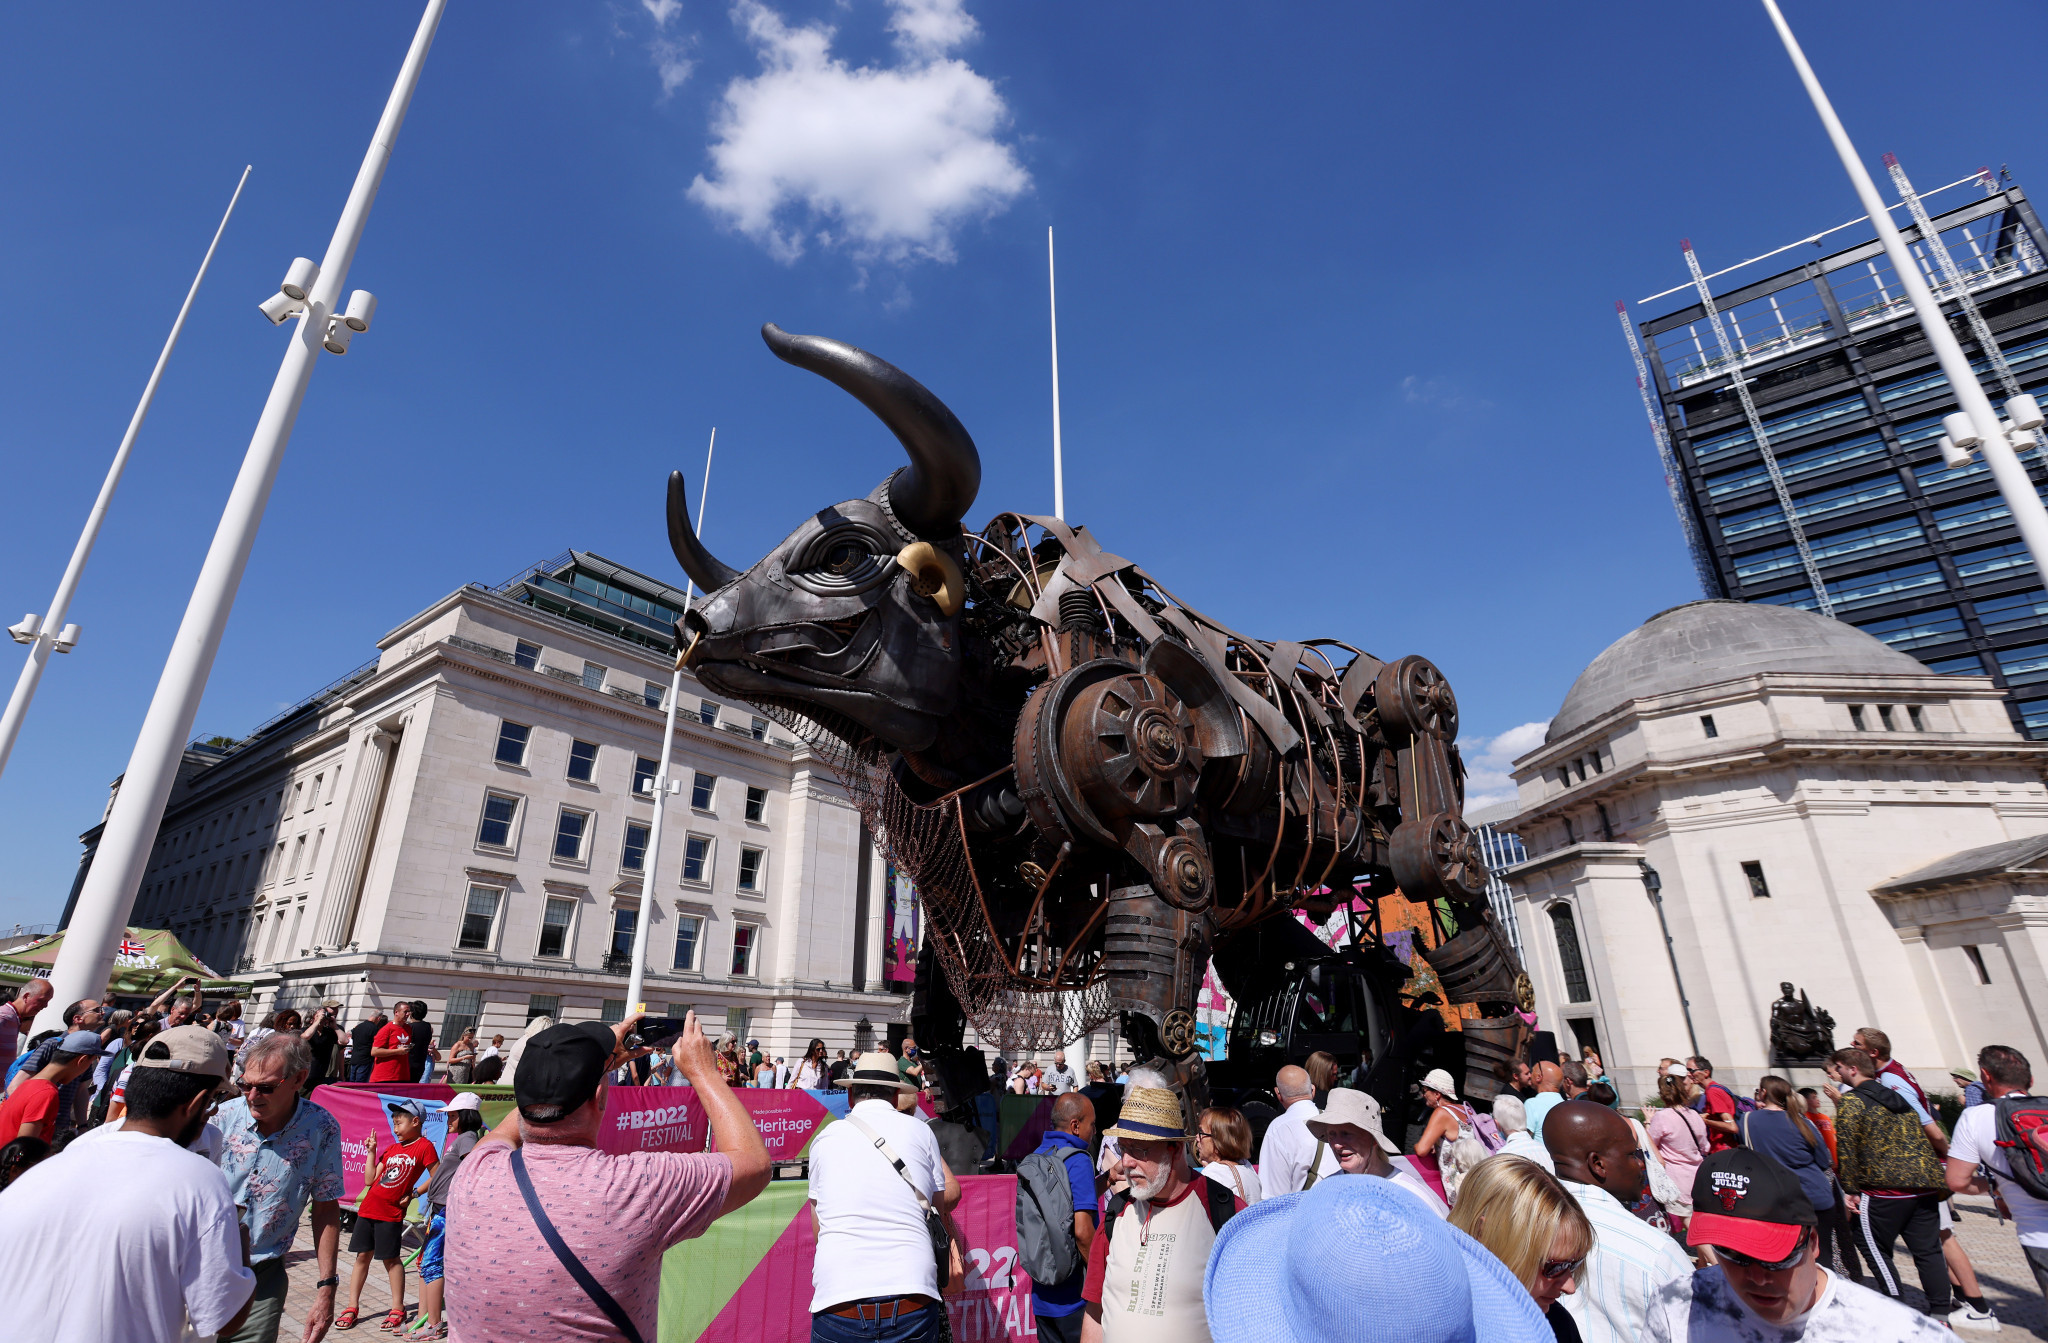 The "Raging Bull" was displayed in Birmingham's Centenary Square throughout the Commonwealth Games ©Getty Images